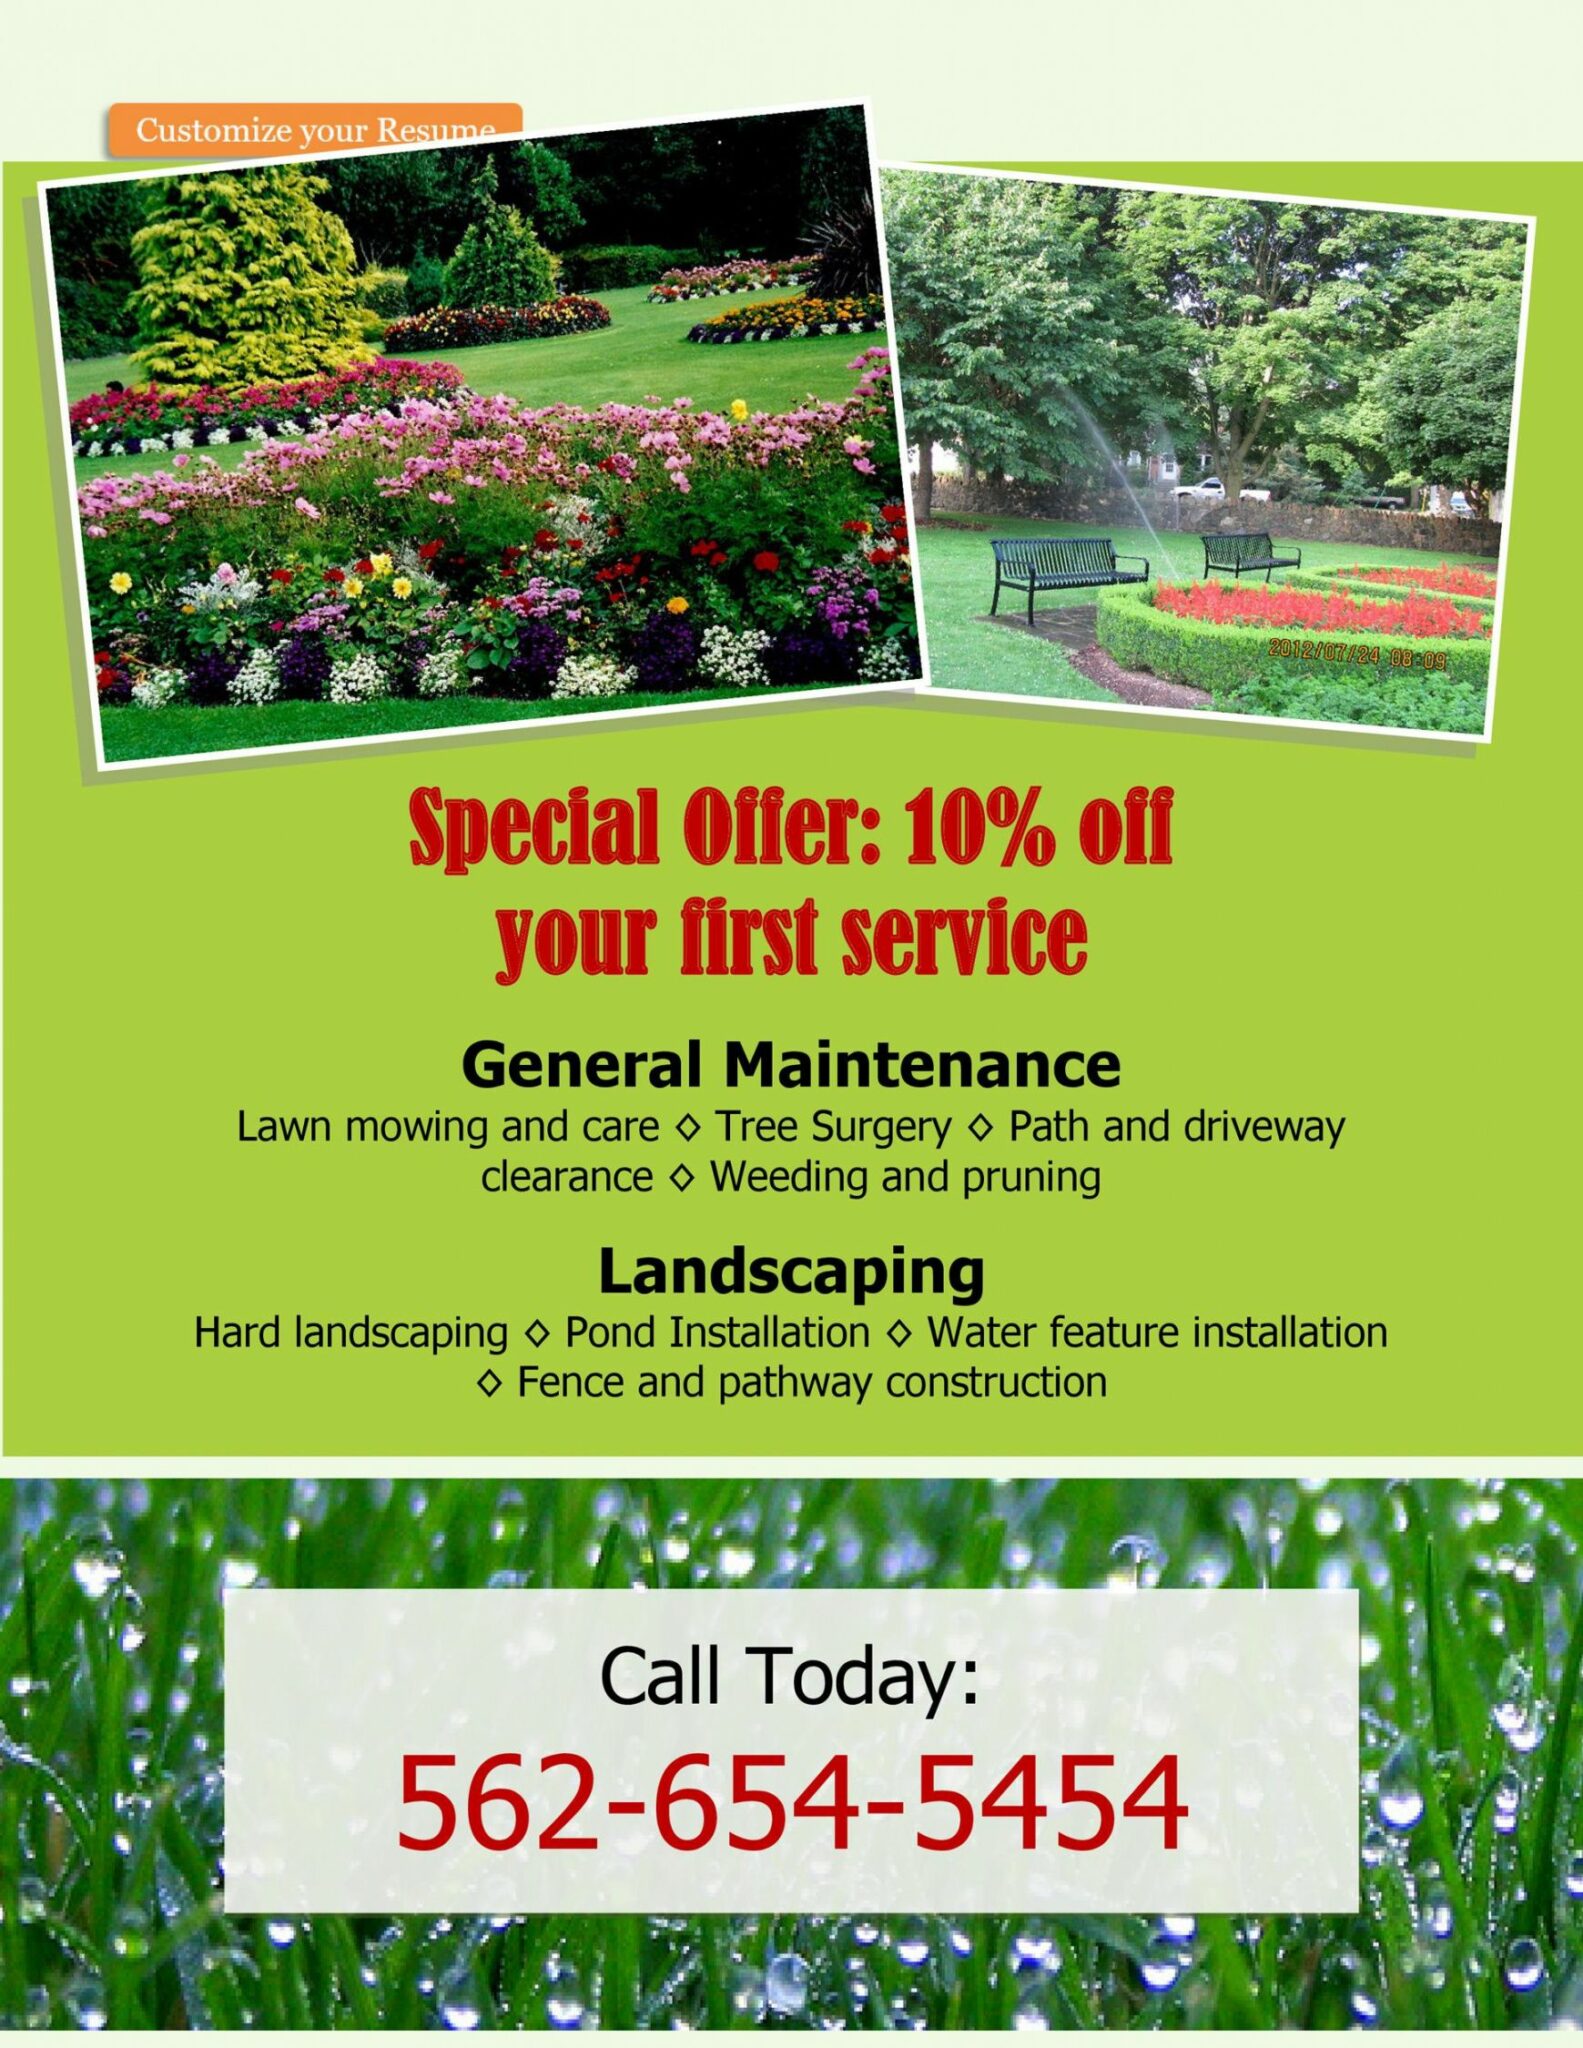 Sample 30 Free Lawn Care Flyer Templates [Lawn Mower Flyers] ᐅ Lawn ...